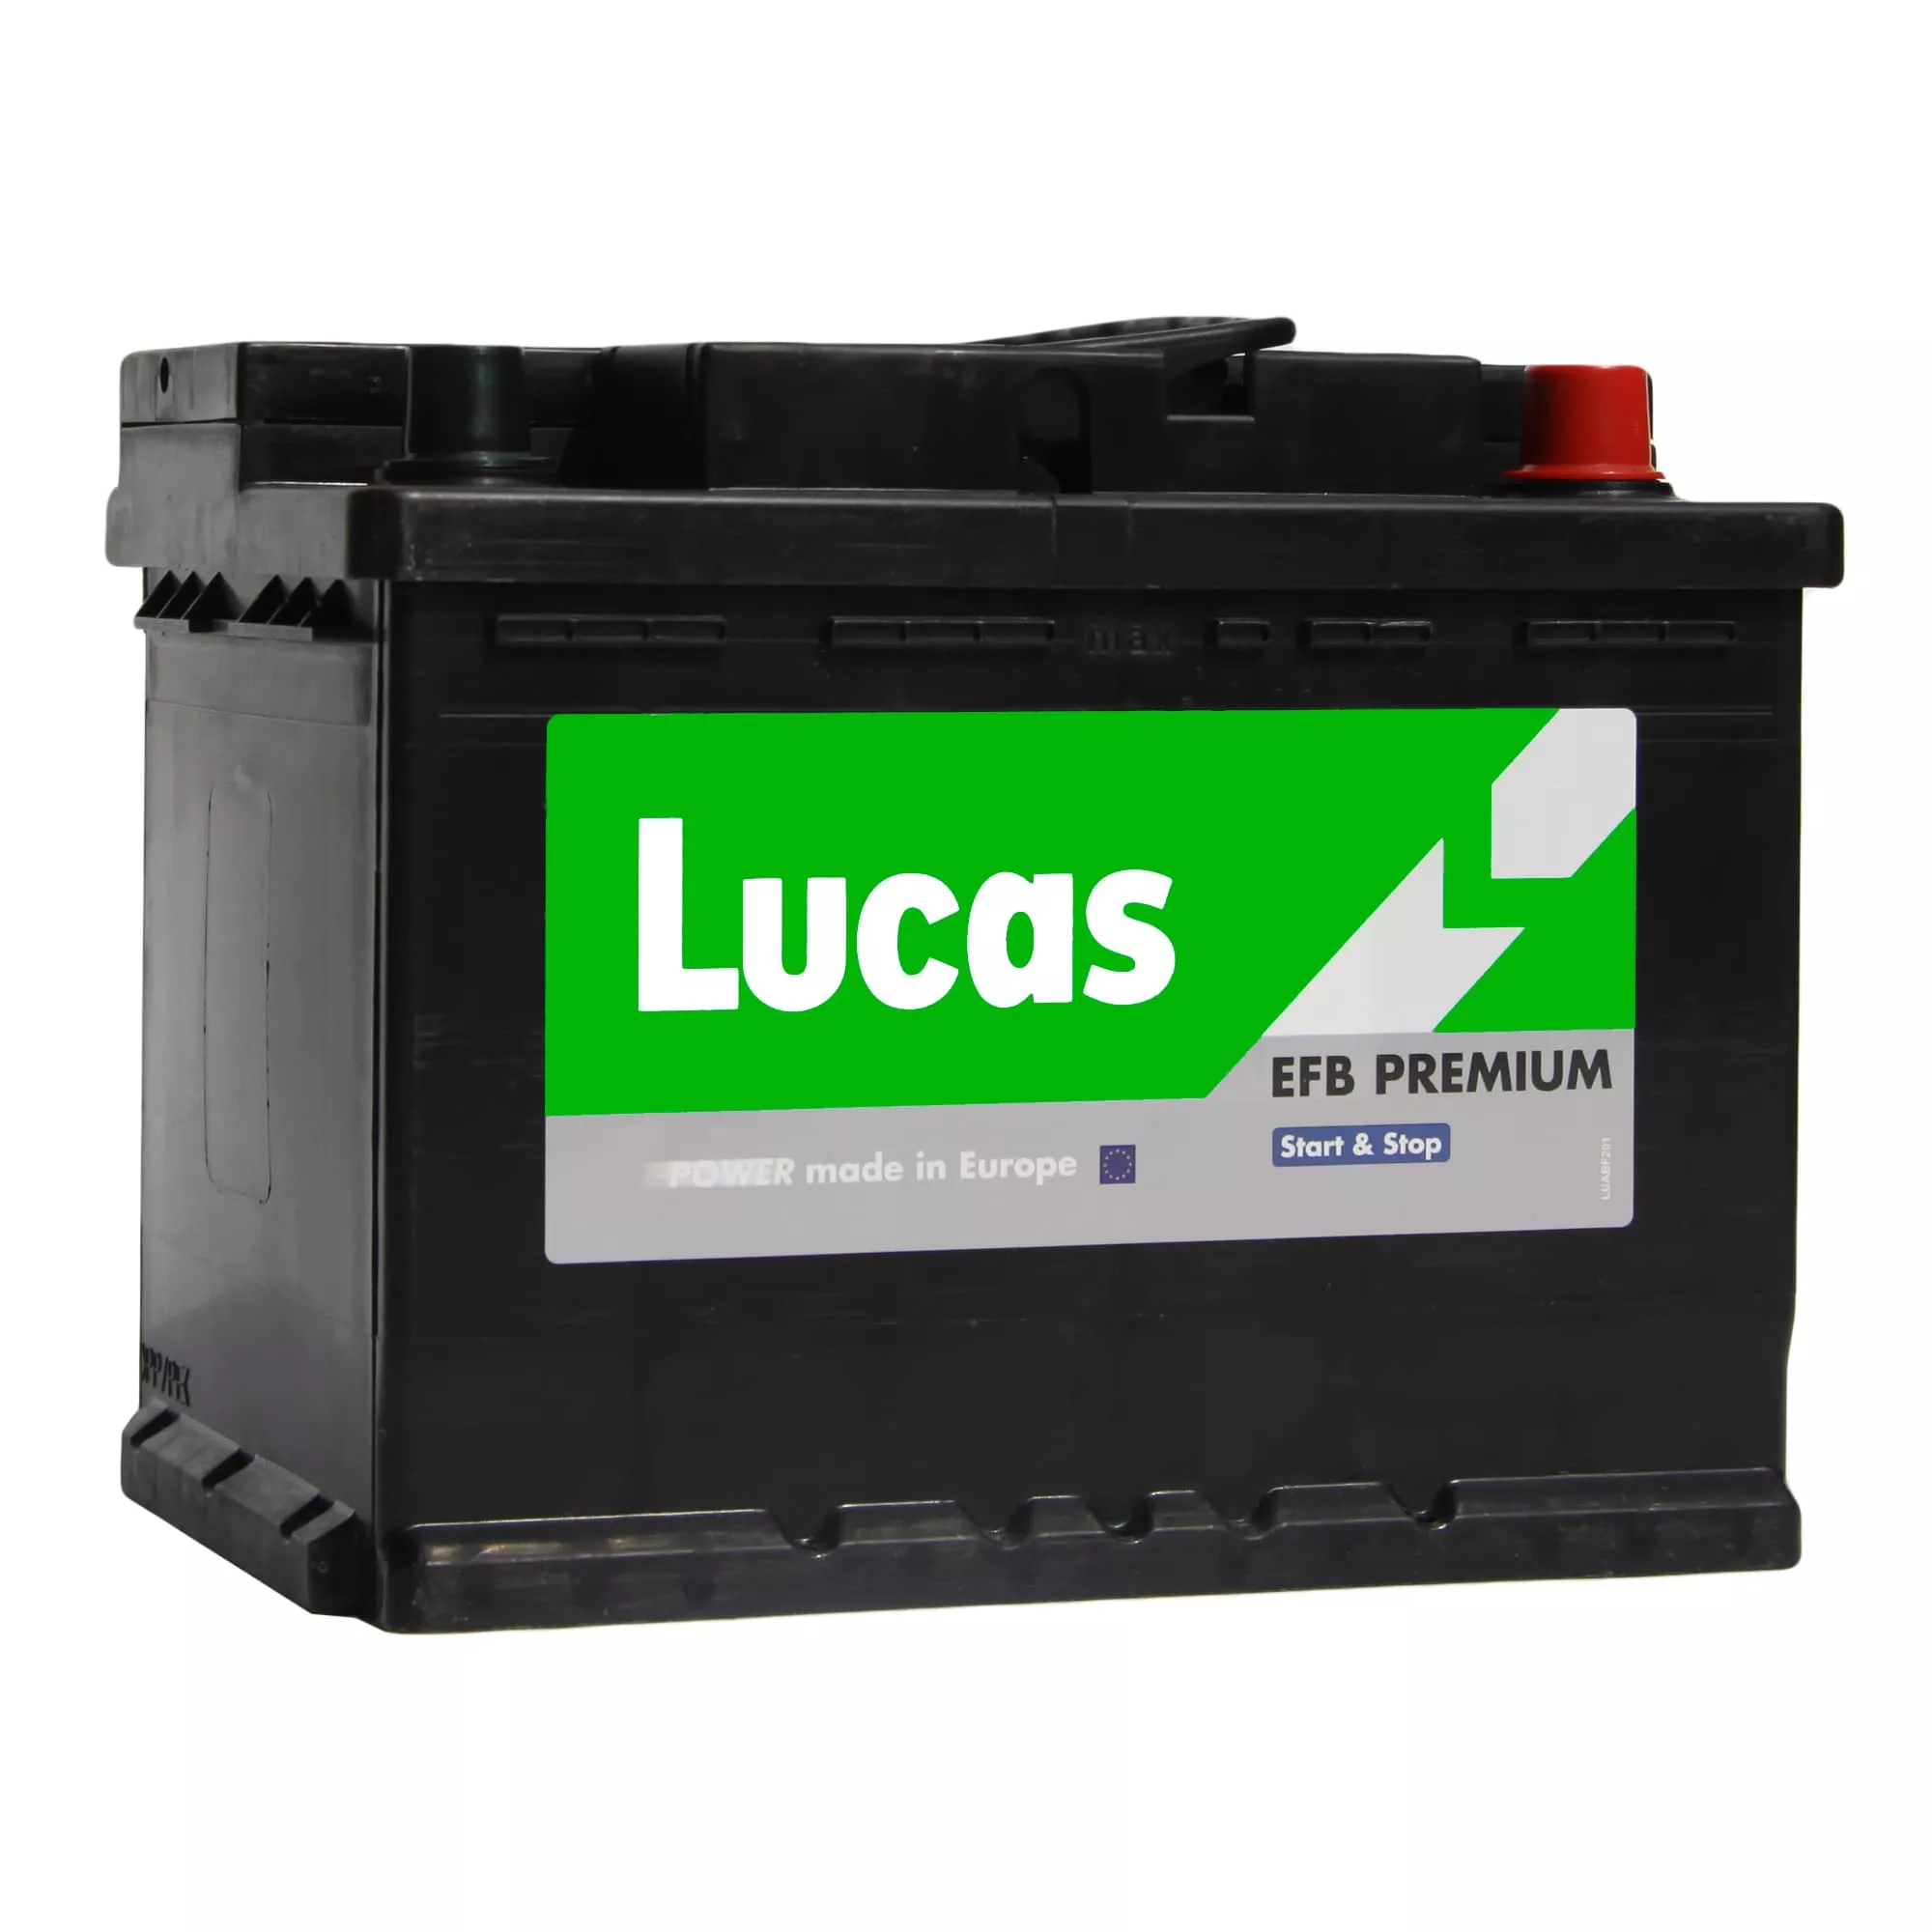 Аккумулятор Lucas (Batteries manufactured by Exide in Spain) 6CT-60 АзЕ EFB Start-Stop (LBEFB001A)